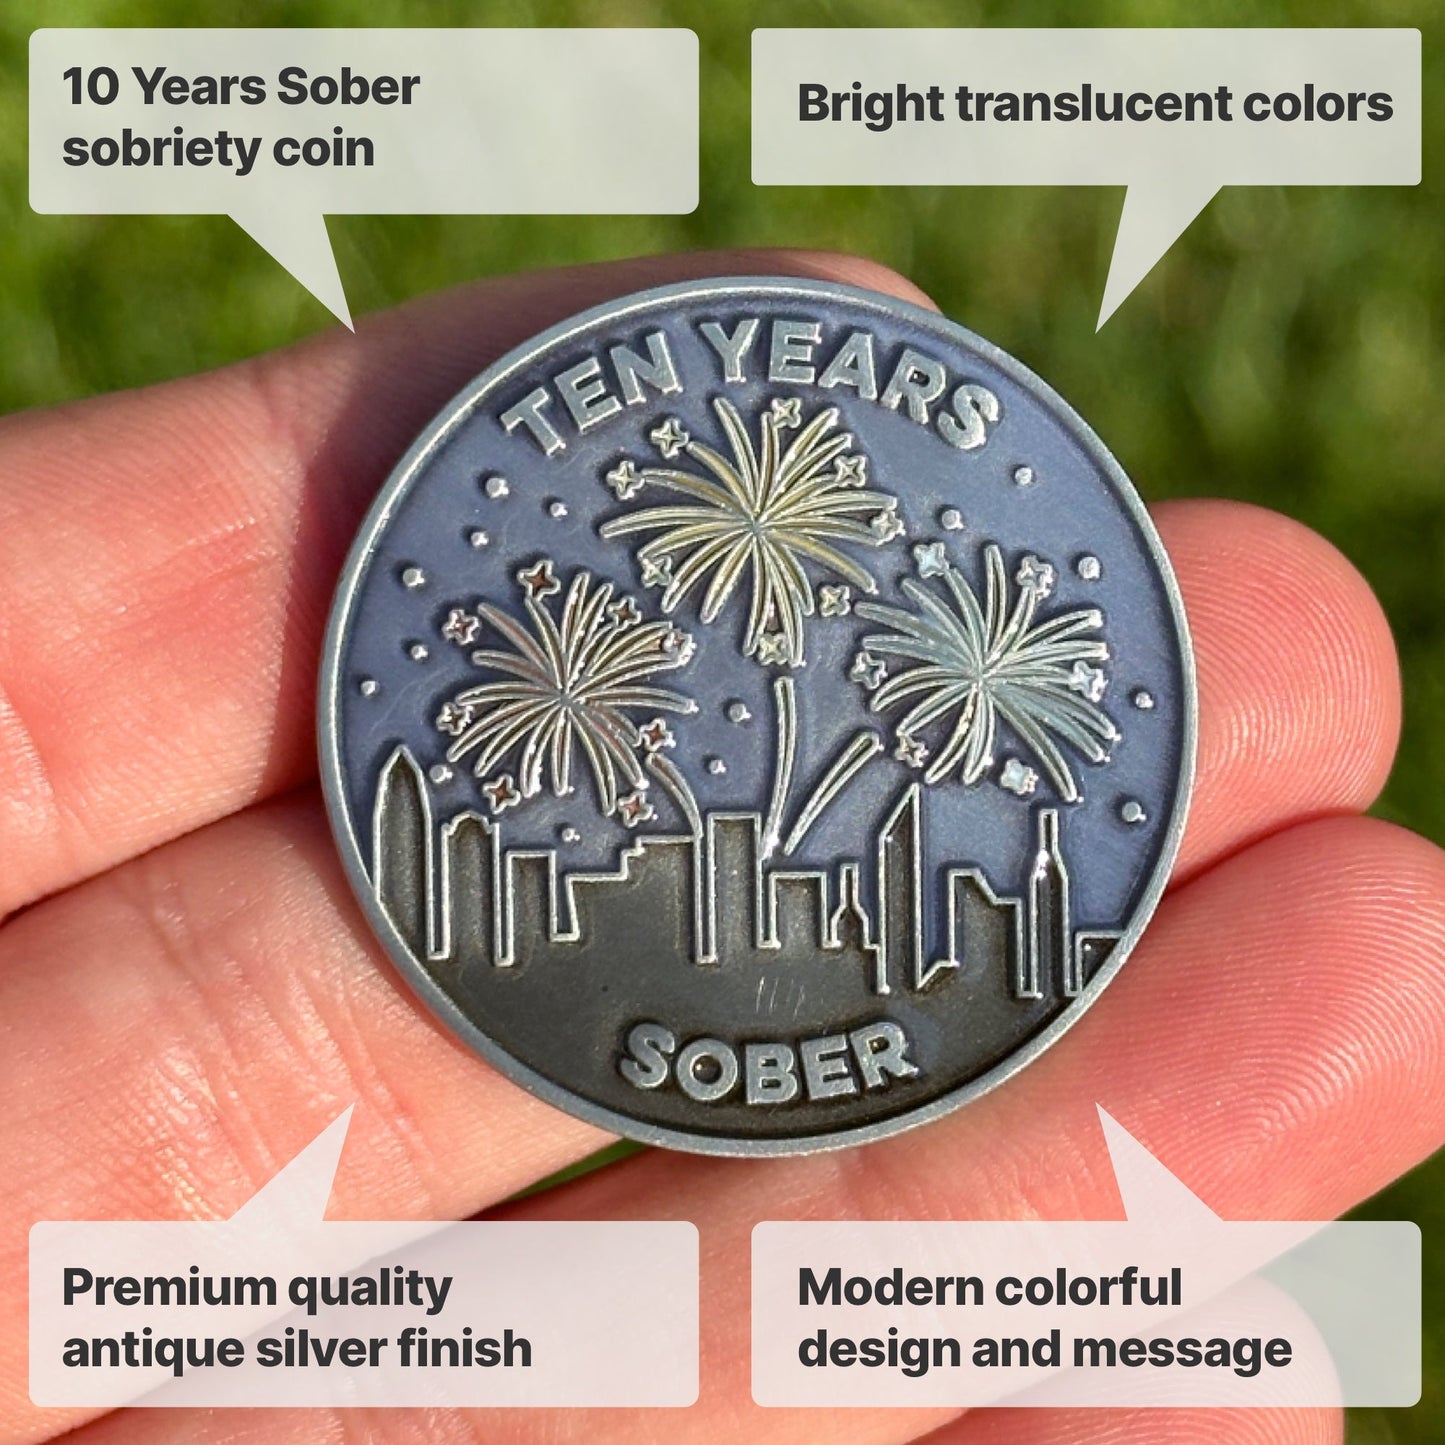 Ten Years Sober sobriety coin - The Achieve Mint